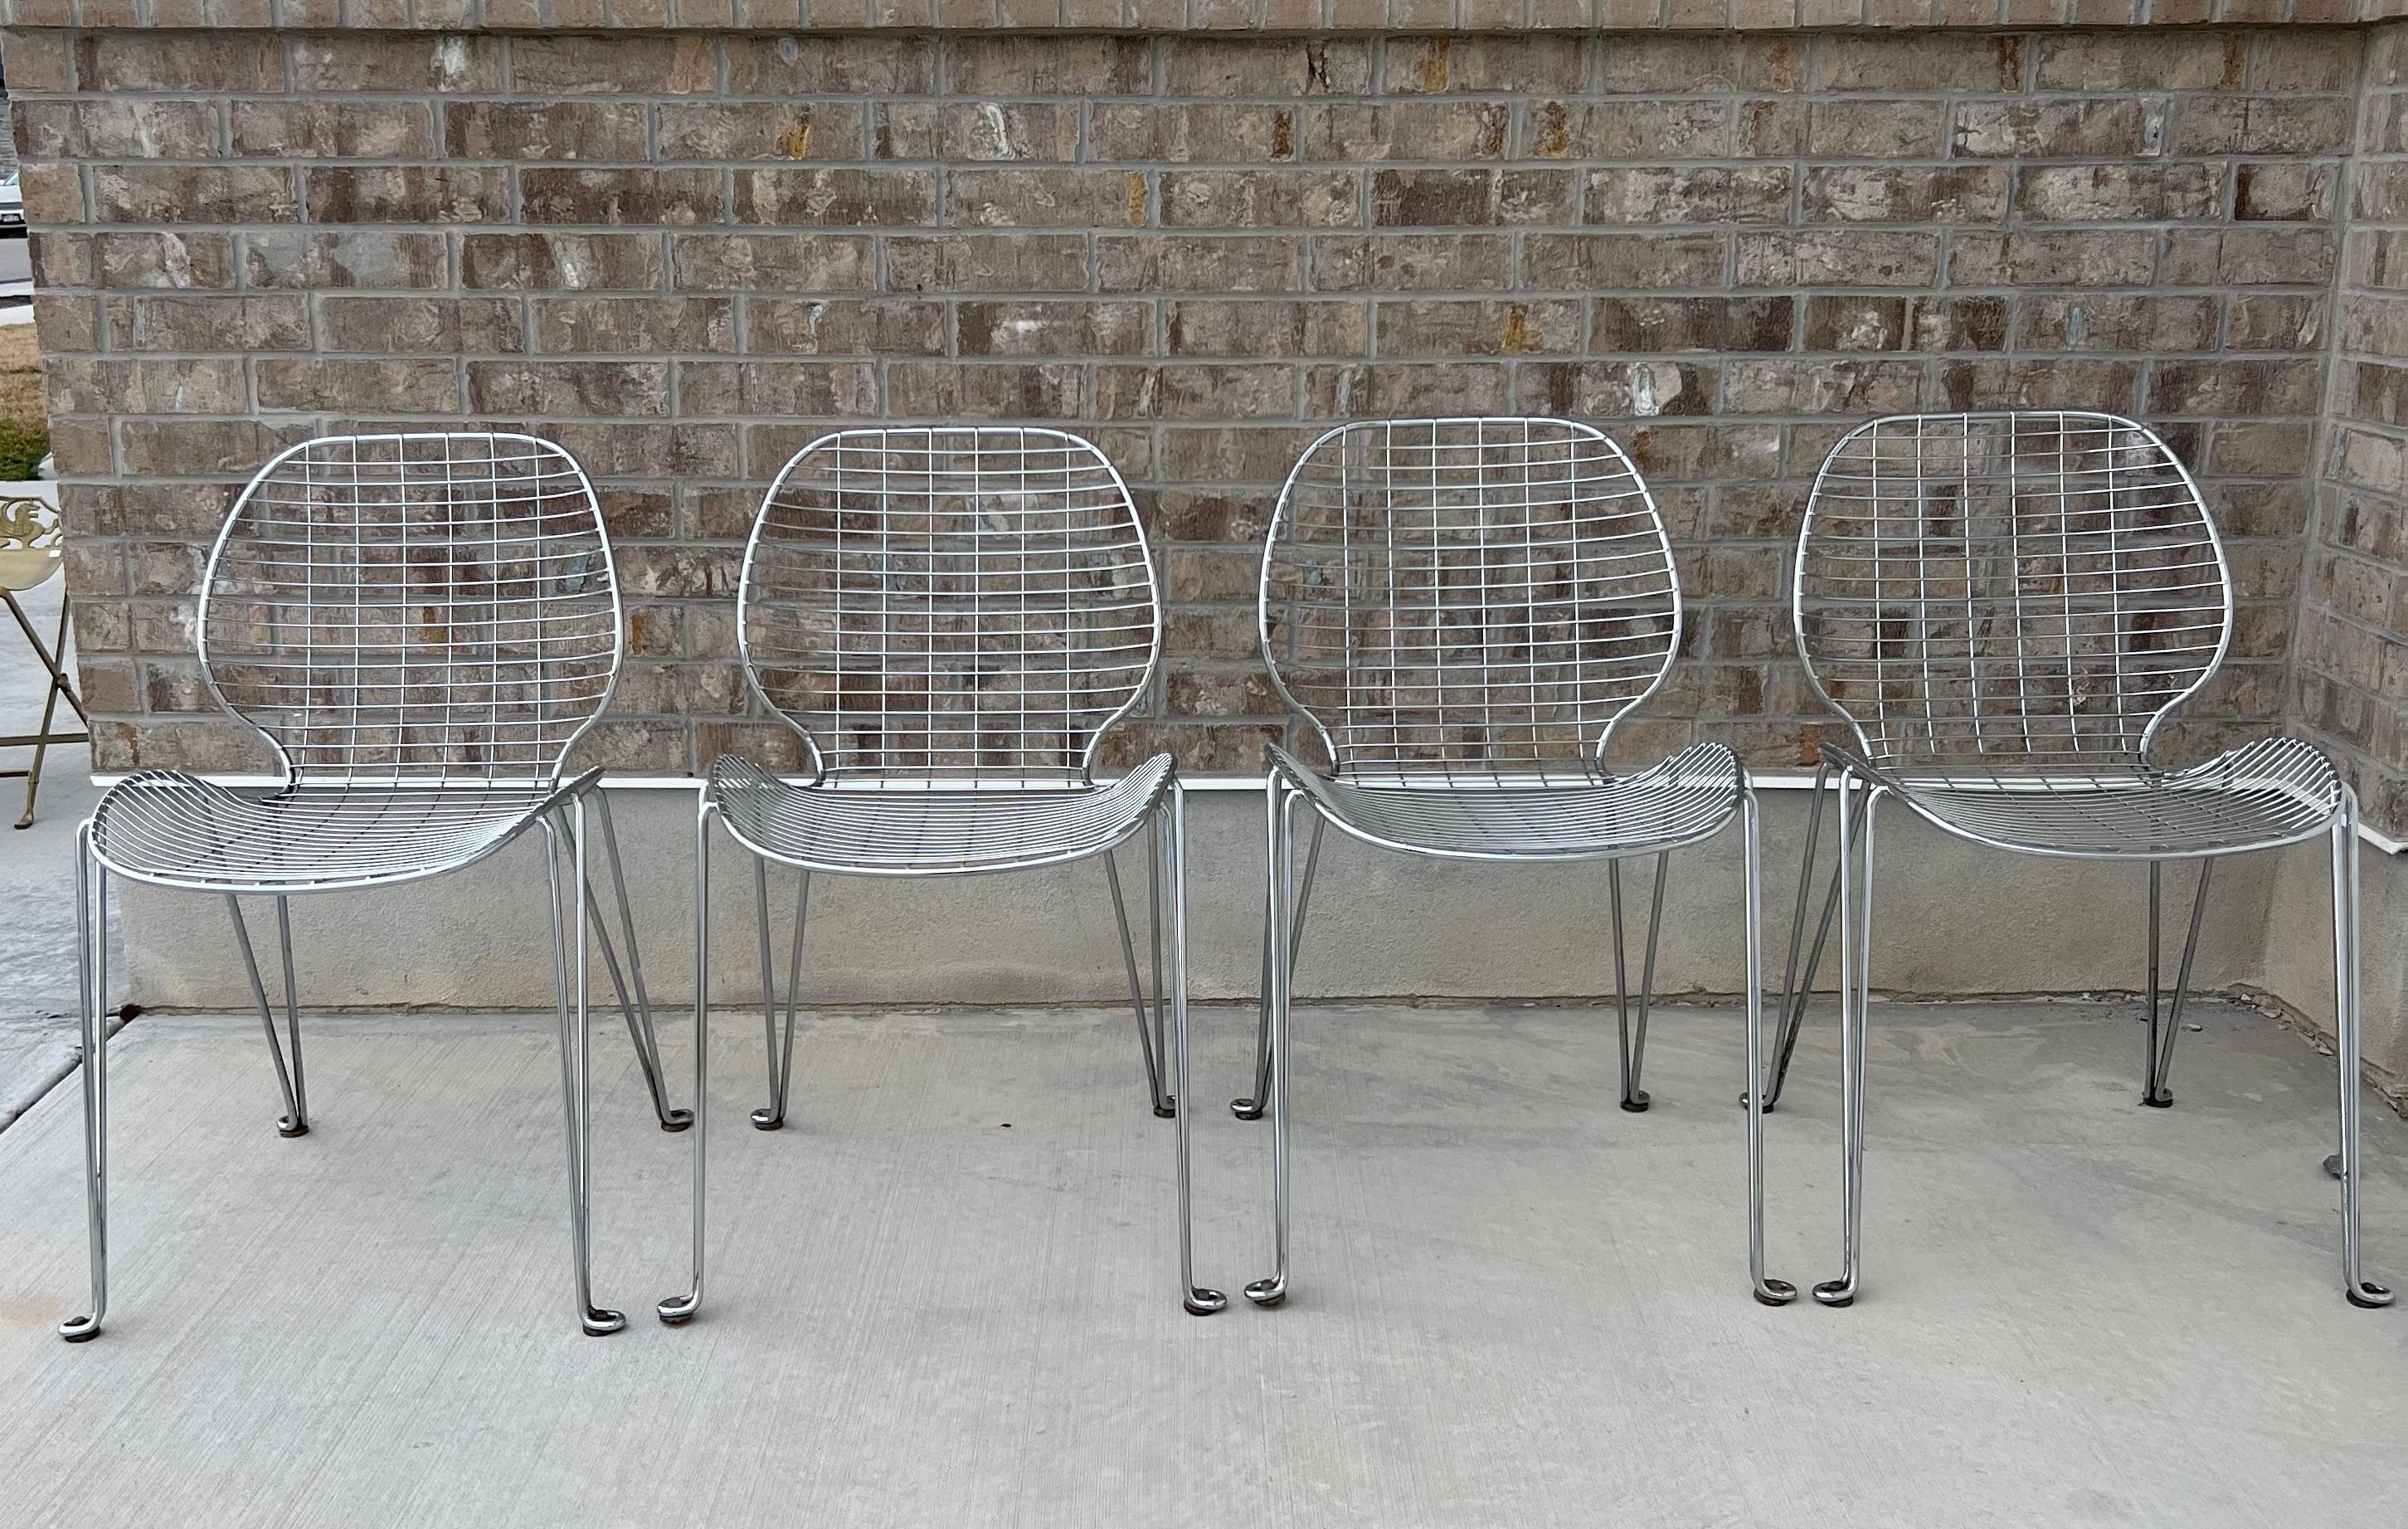 Vintage Metal Wire Chairs With Hairpin Legs - Set of Four For Sale 4